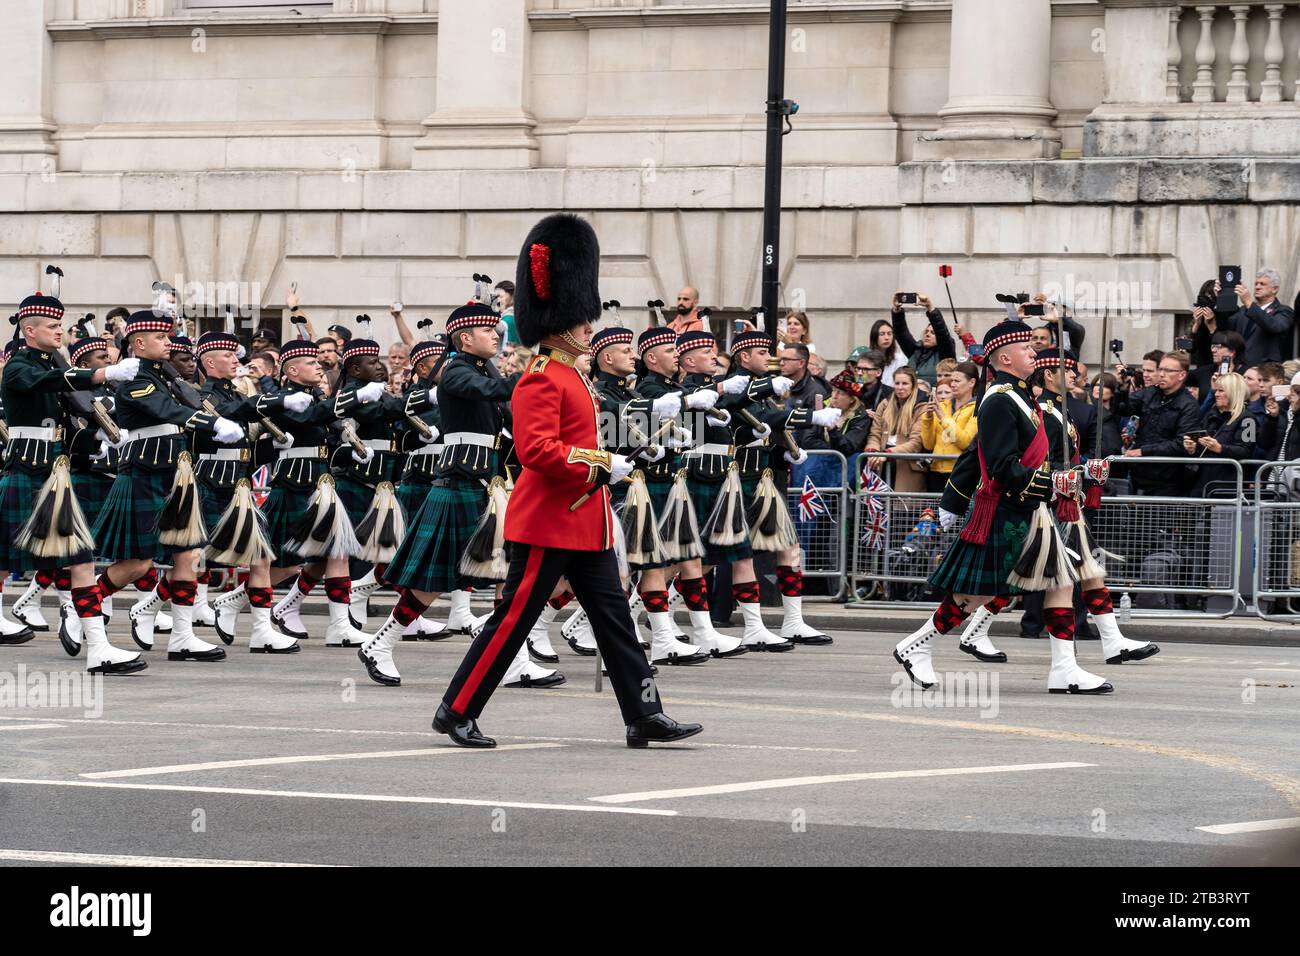 Procession of military troops for Queen Elizabeth II Stock Photo